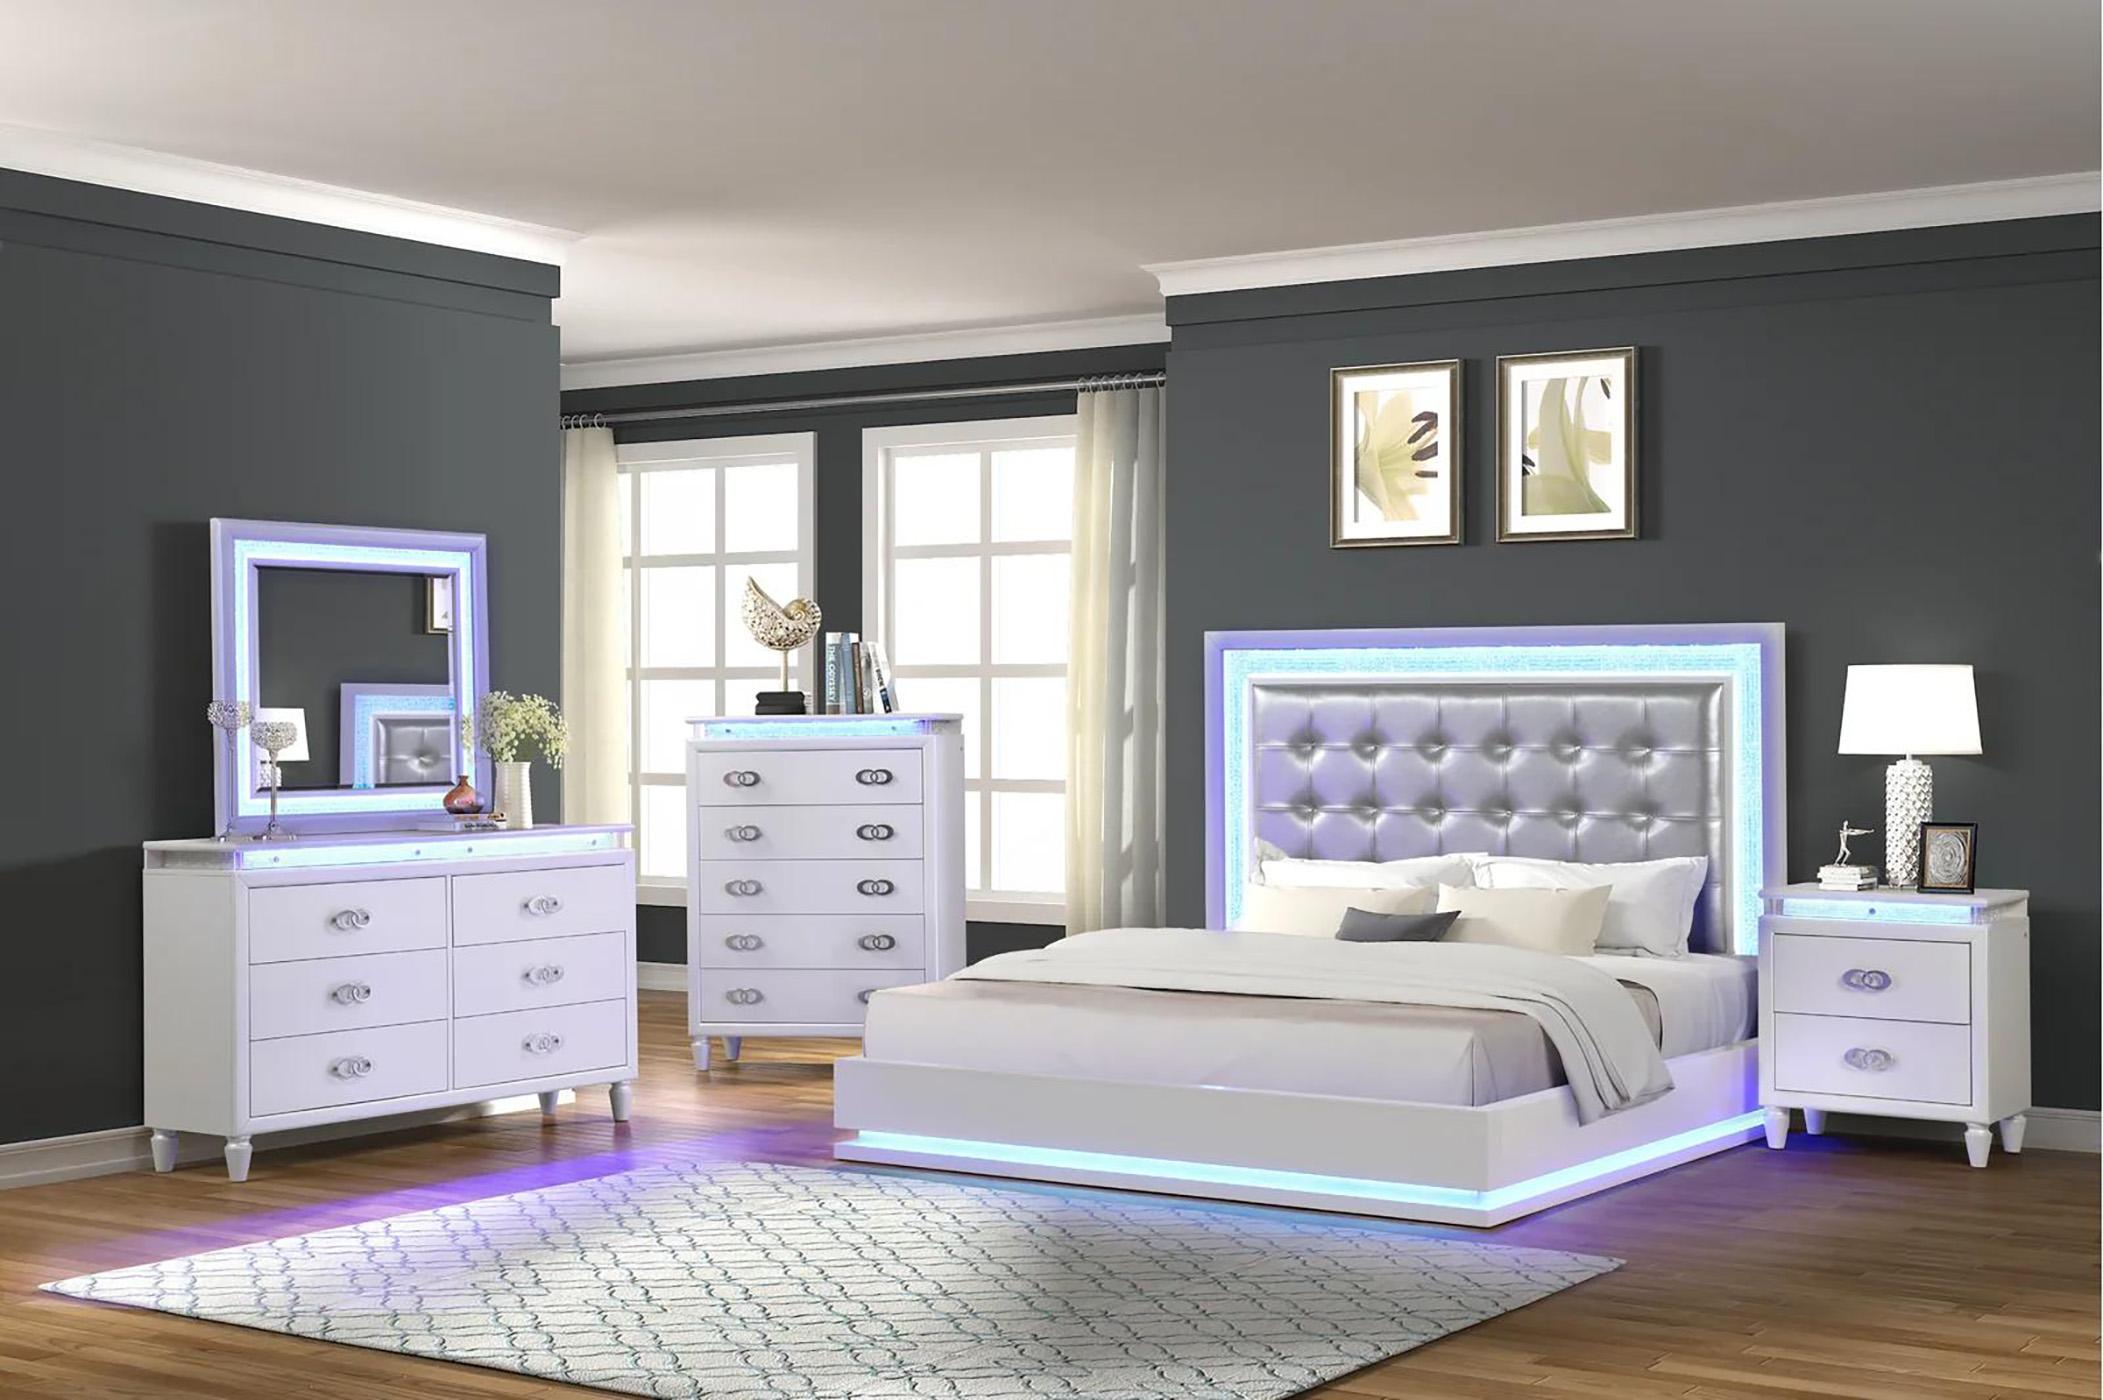 

    
Milky White Tufted Queen Led Bedroom Set 4Pcs PASSION Galaxy Home Contemporary
